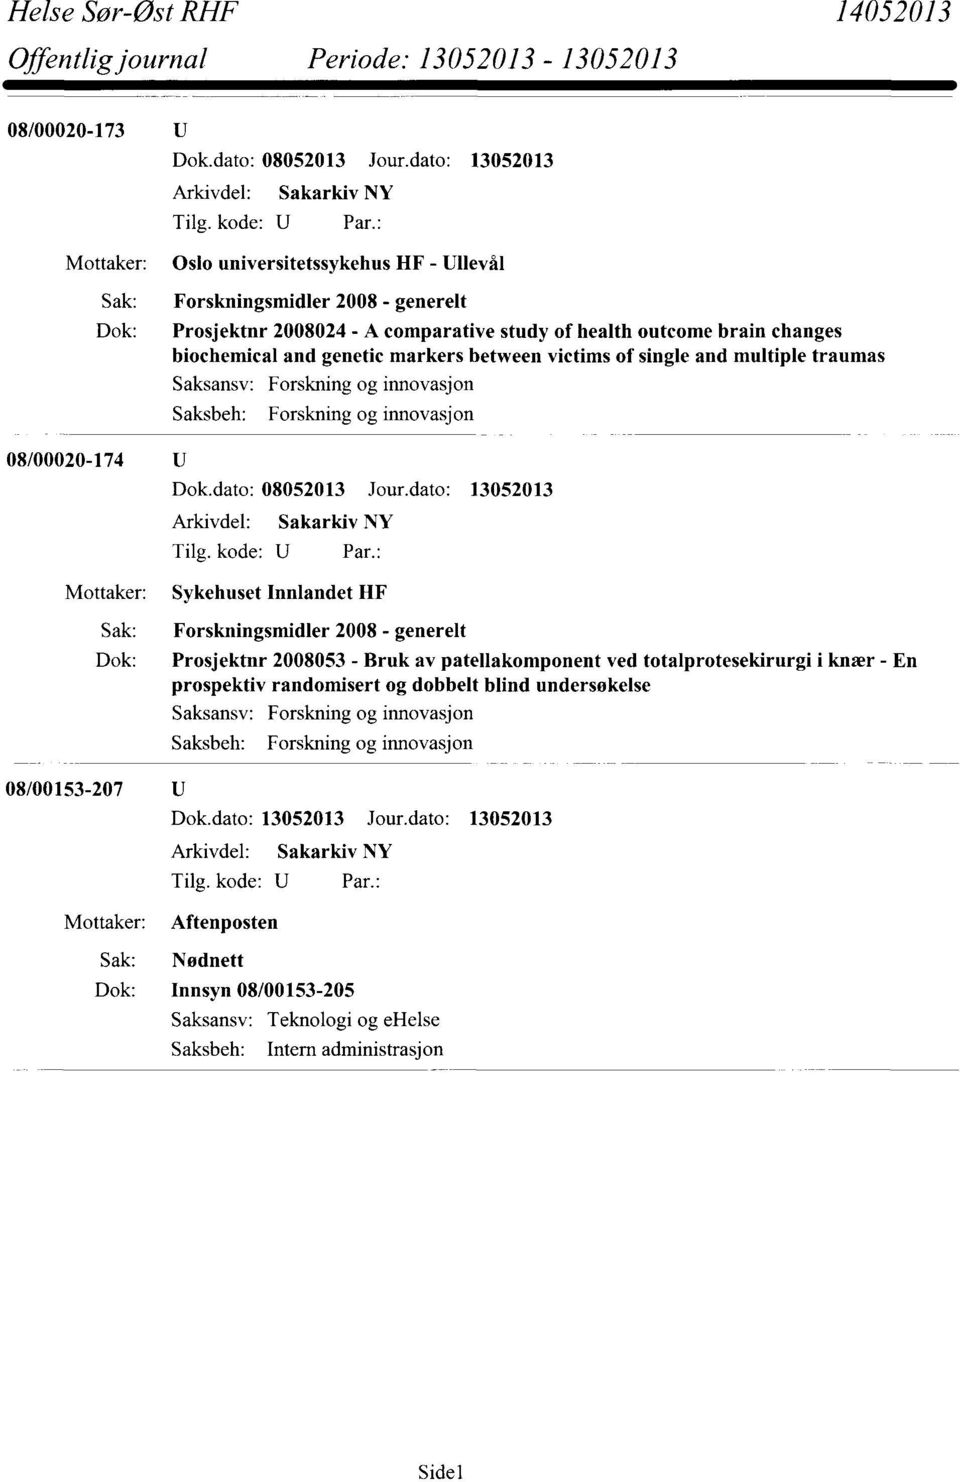 biochemical and genetic markers between victims of single and multiple traumas 08/00020-174 U Forskning og innovasjon Forskning og innovasjon Dok.dato: 08052013 Jour.